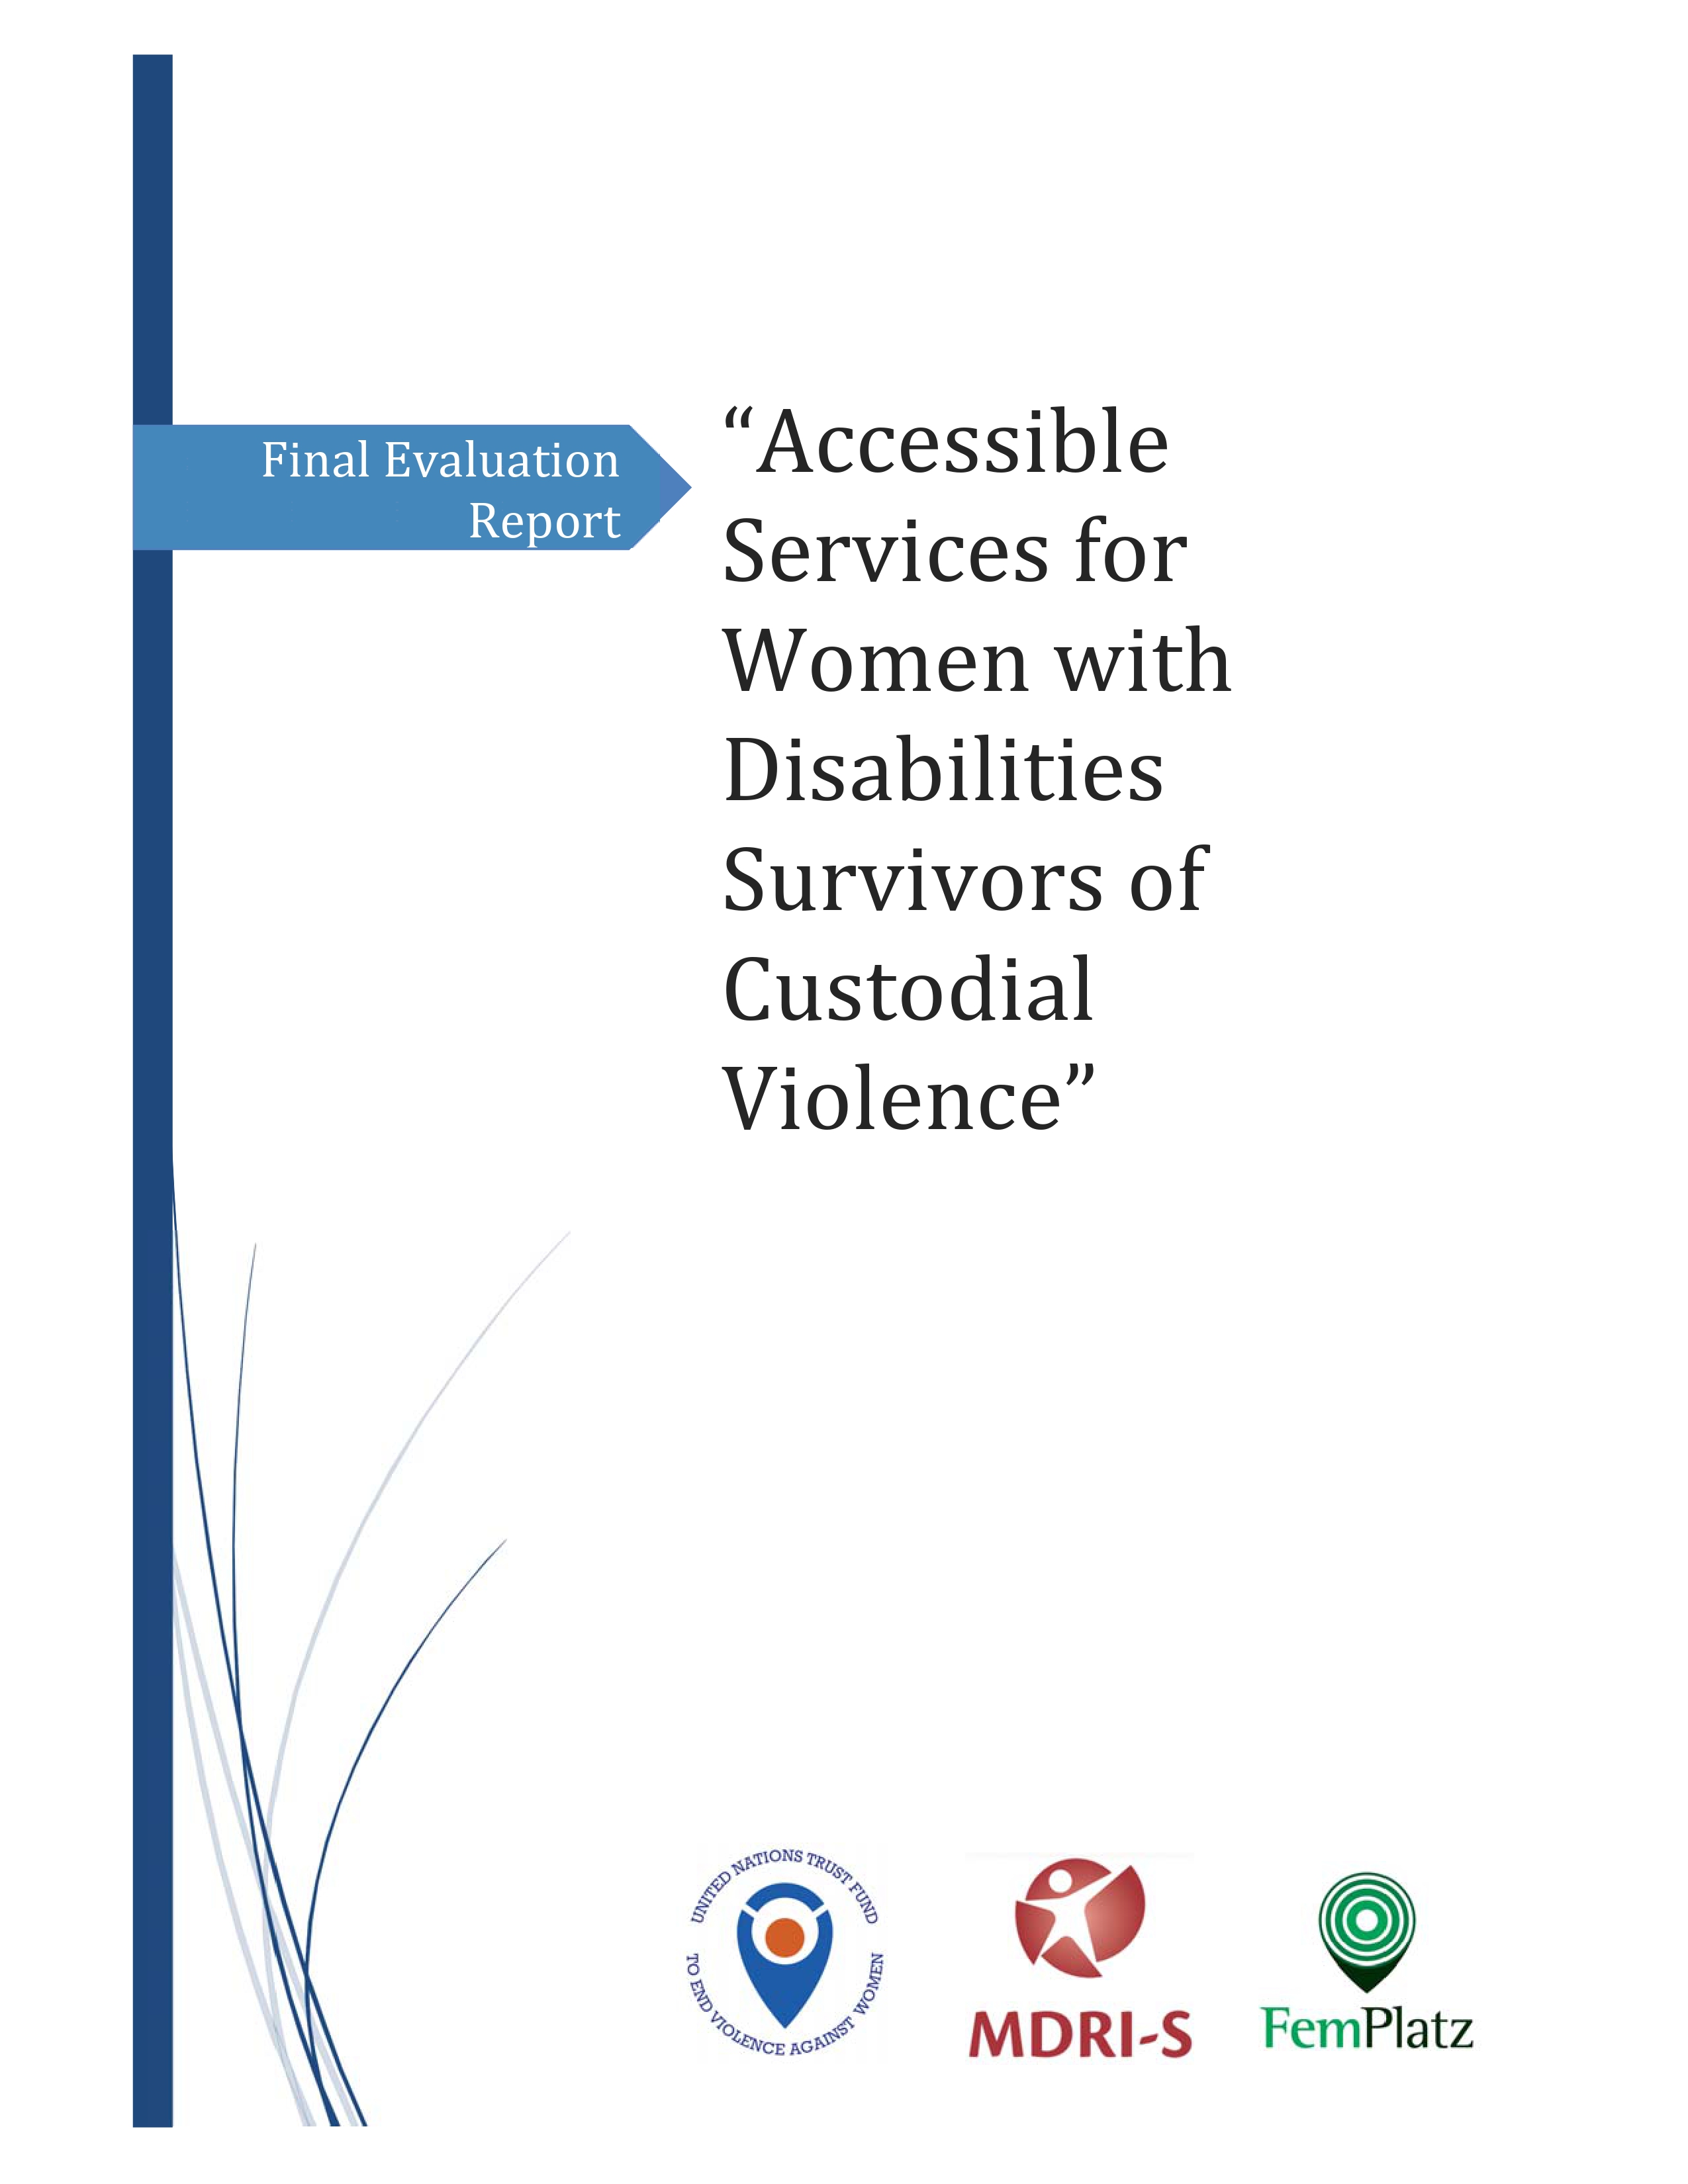 Final Evaluation: Accessible Services for Women with Disabilities Survivors of Custodial Violence (Serbia)  